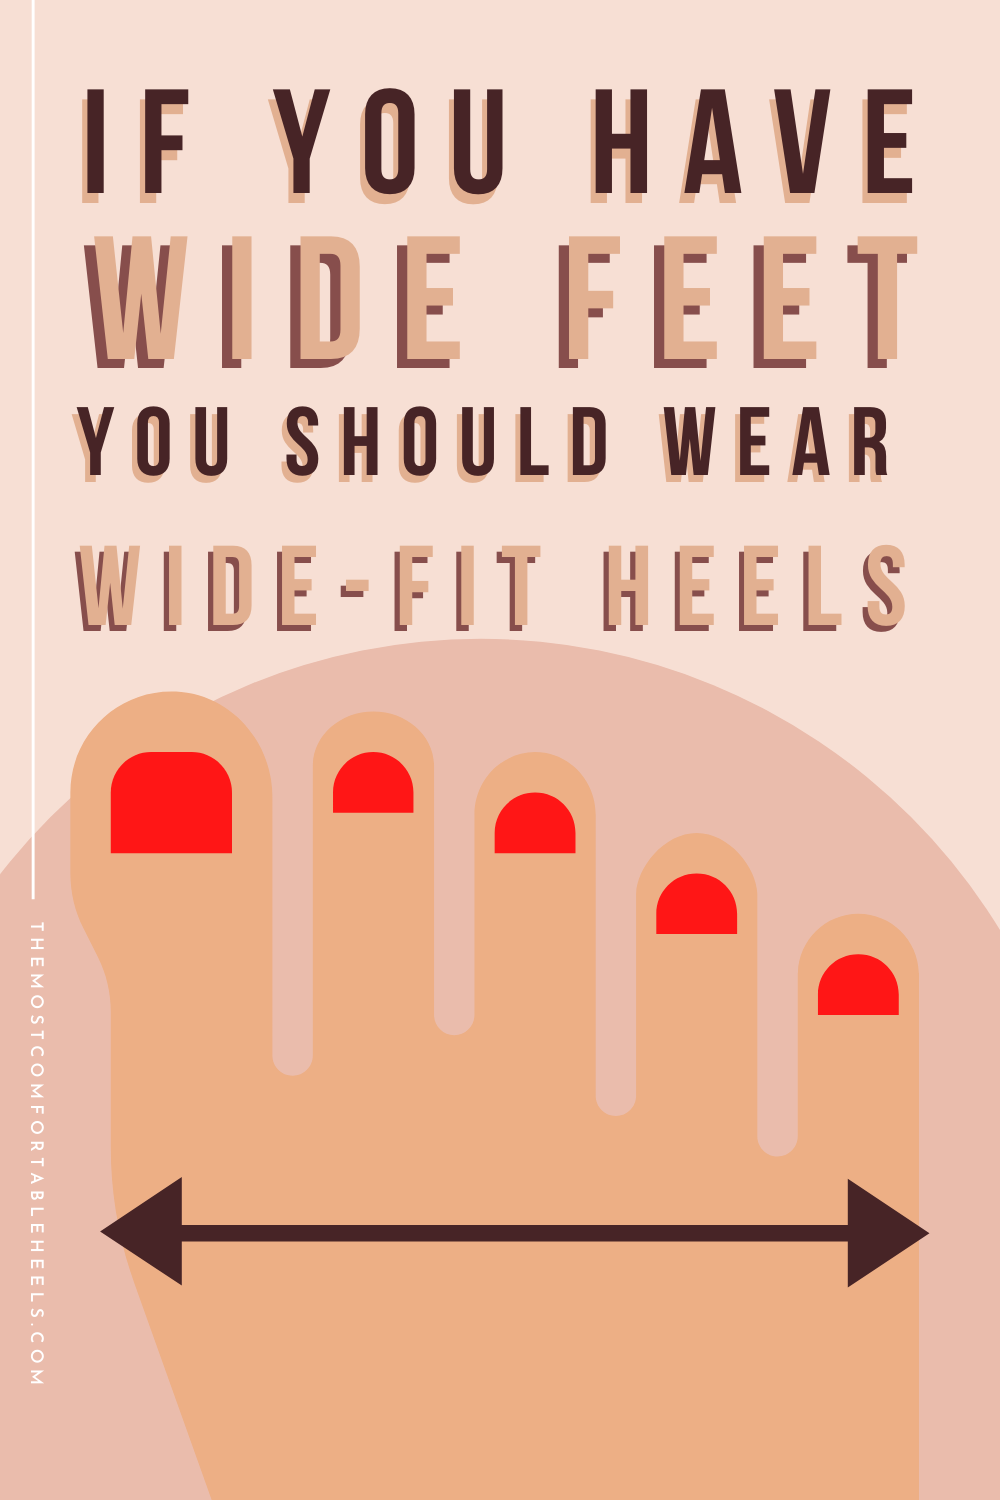 how-to-find-comfortable-heels-for-wide-feet (1).png